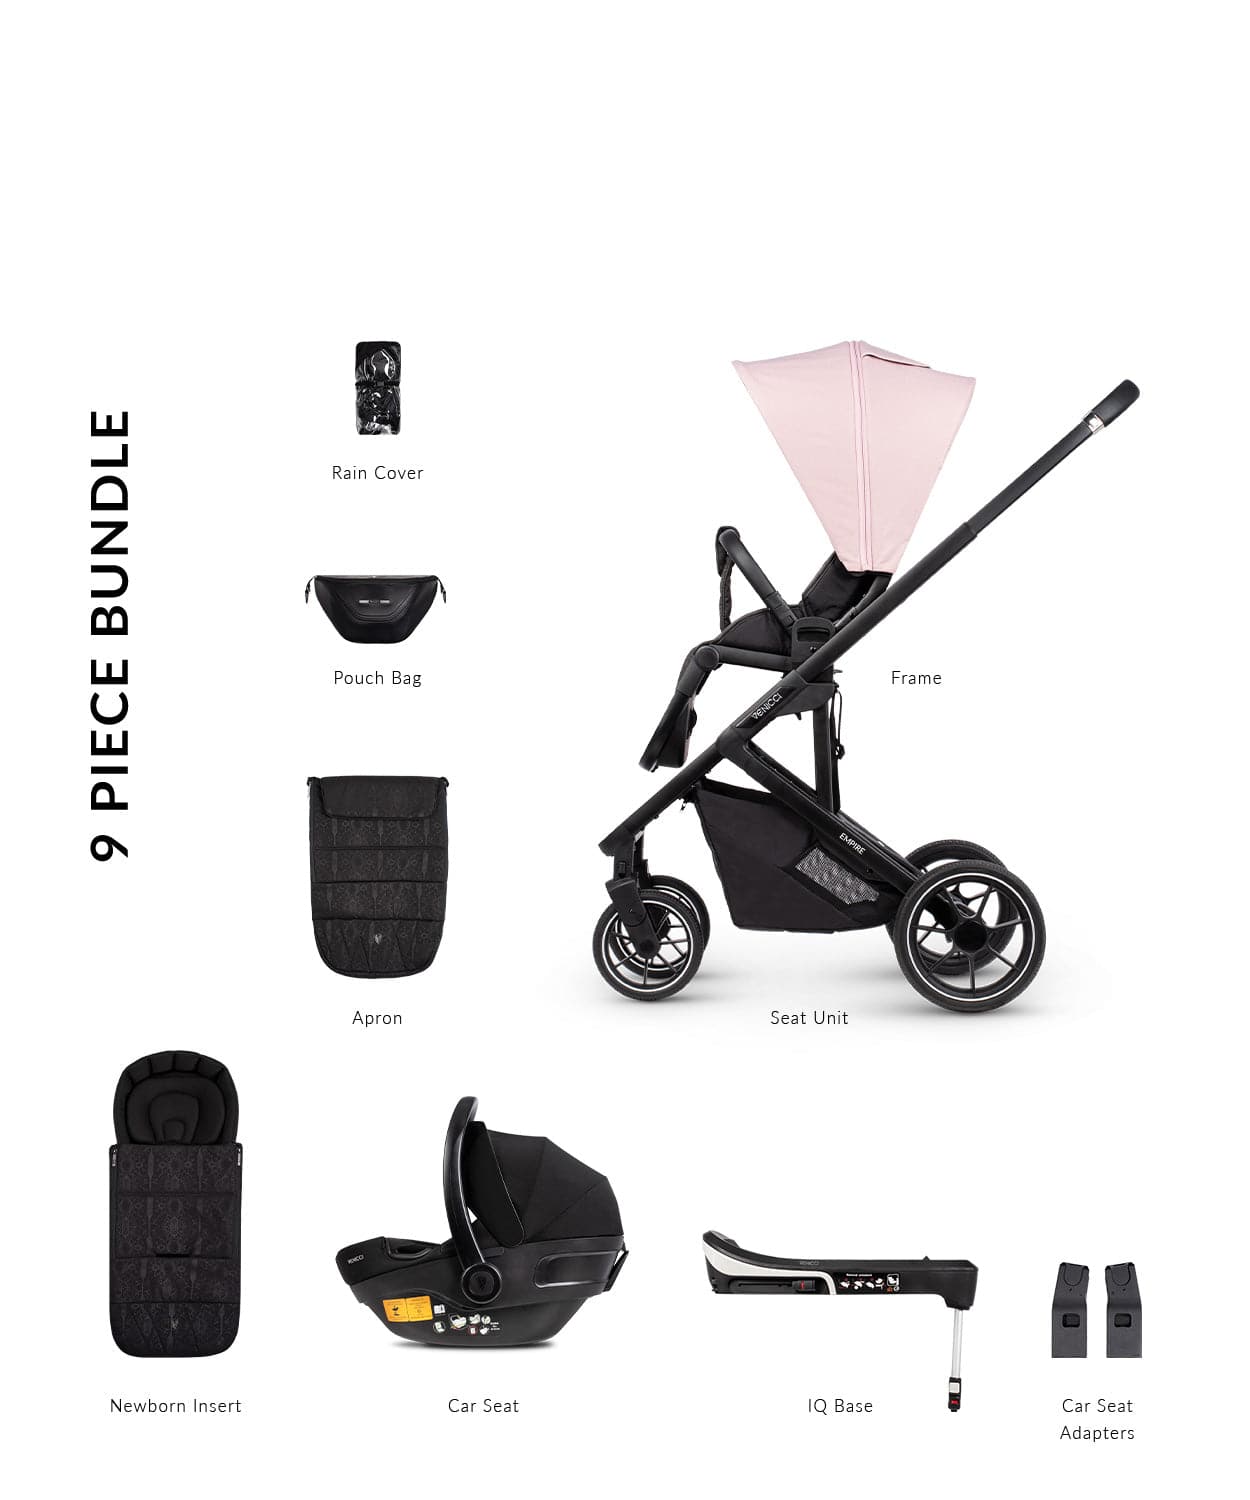 Venicci Empire - Deluxe City Travel System Bundle - Silk Pink - For Your Little One